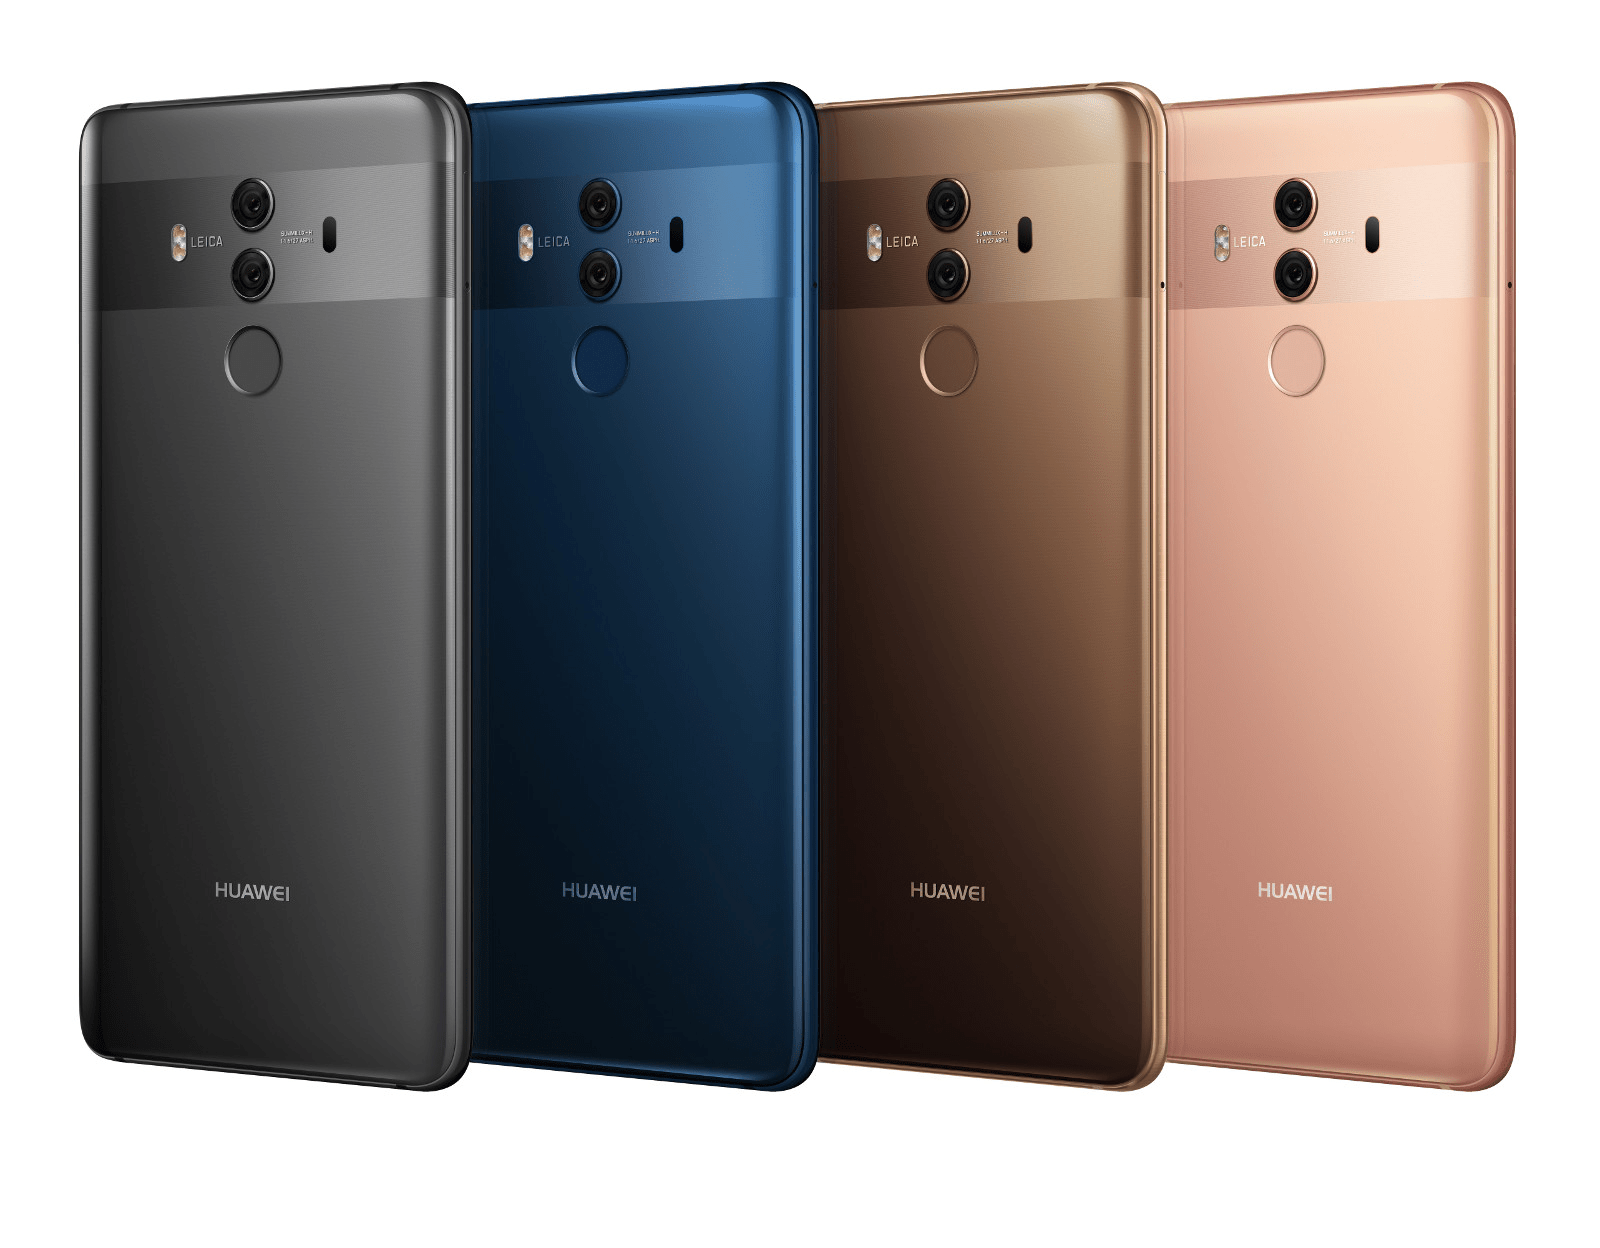 Huawei Mate 10 Pro - Full Specifications leaked